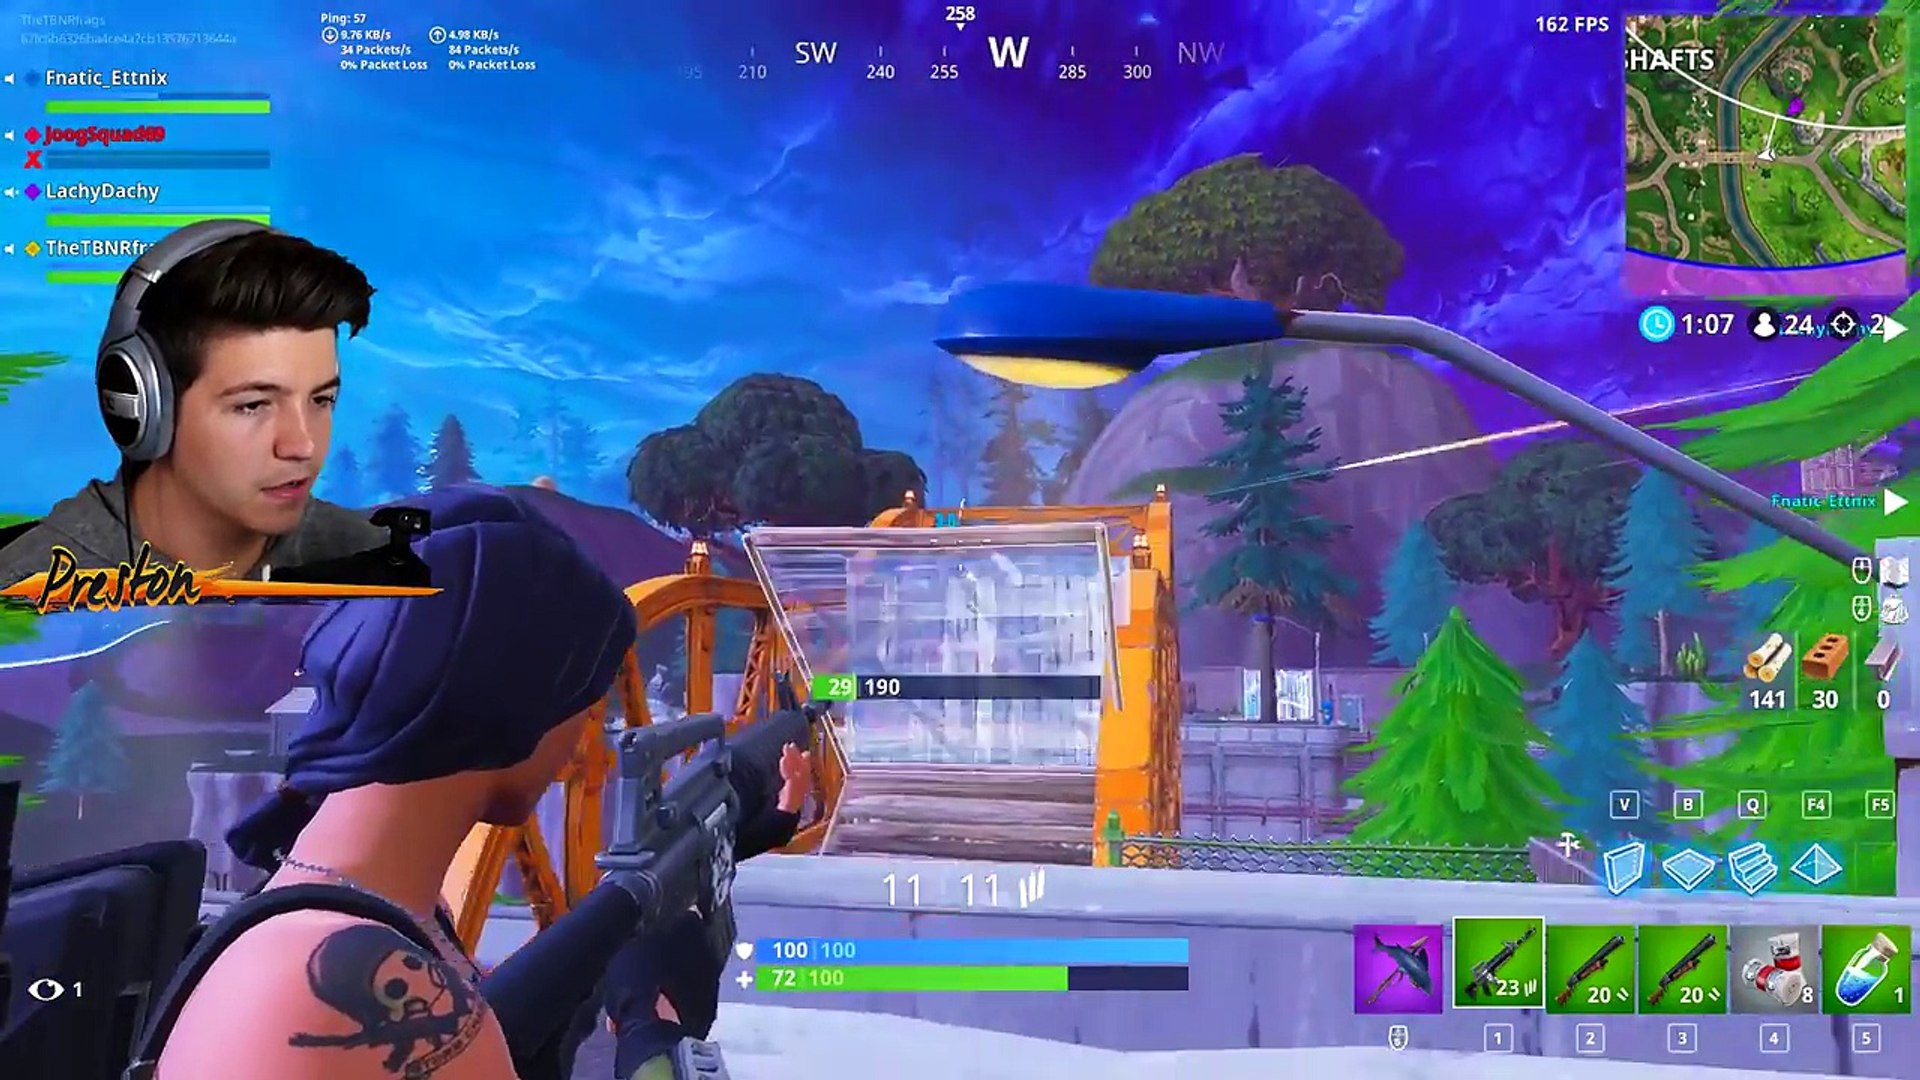 We Won Against A Pro Player In Fortnite 20 000 Tournament With